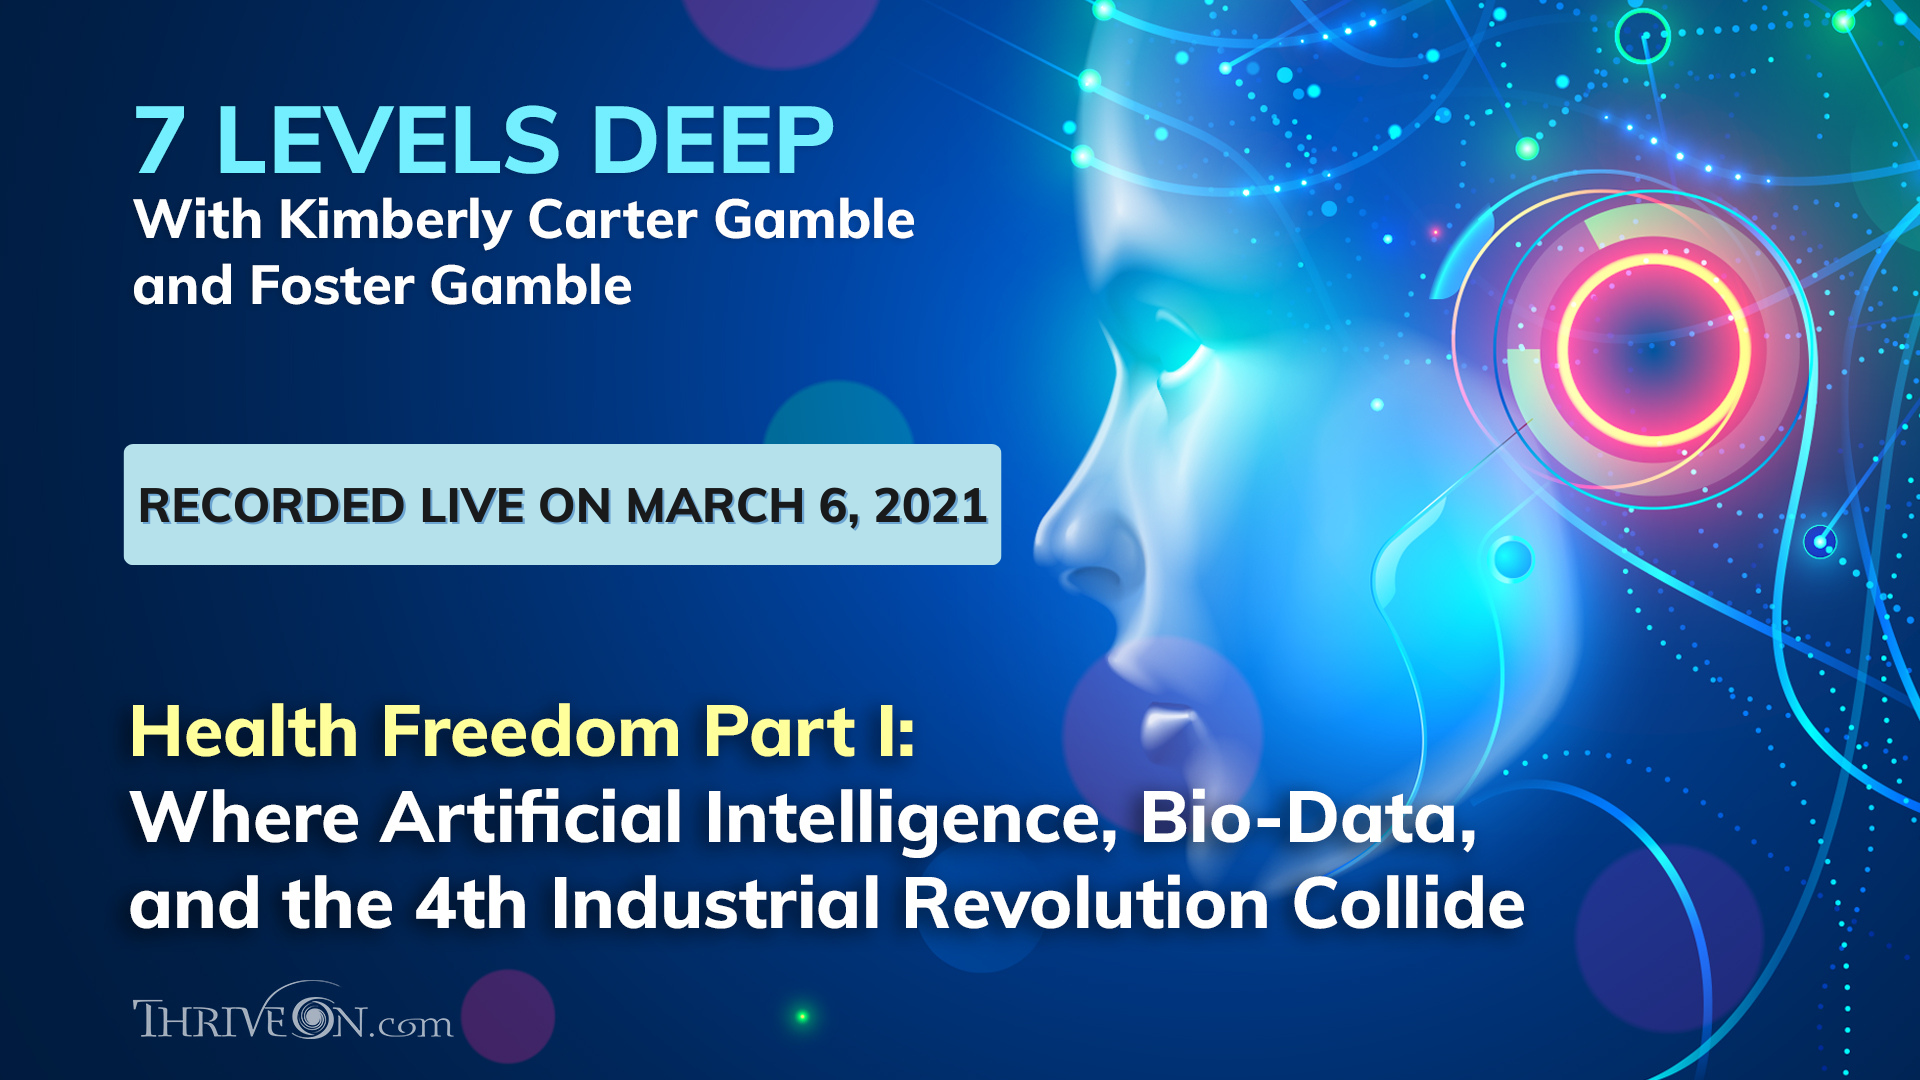 Health Freedom Part I: Where Artificial Intelligence, Bio-Data, and the 4th Industrial Revolution Collide